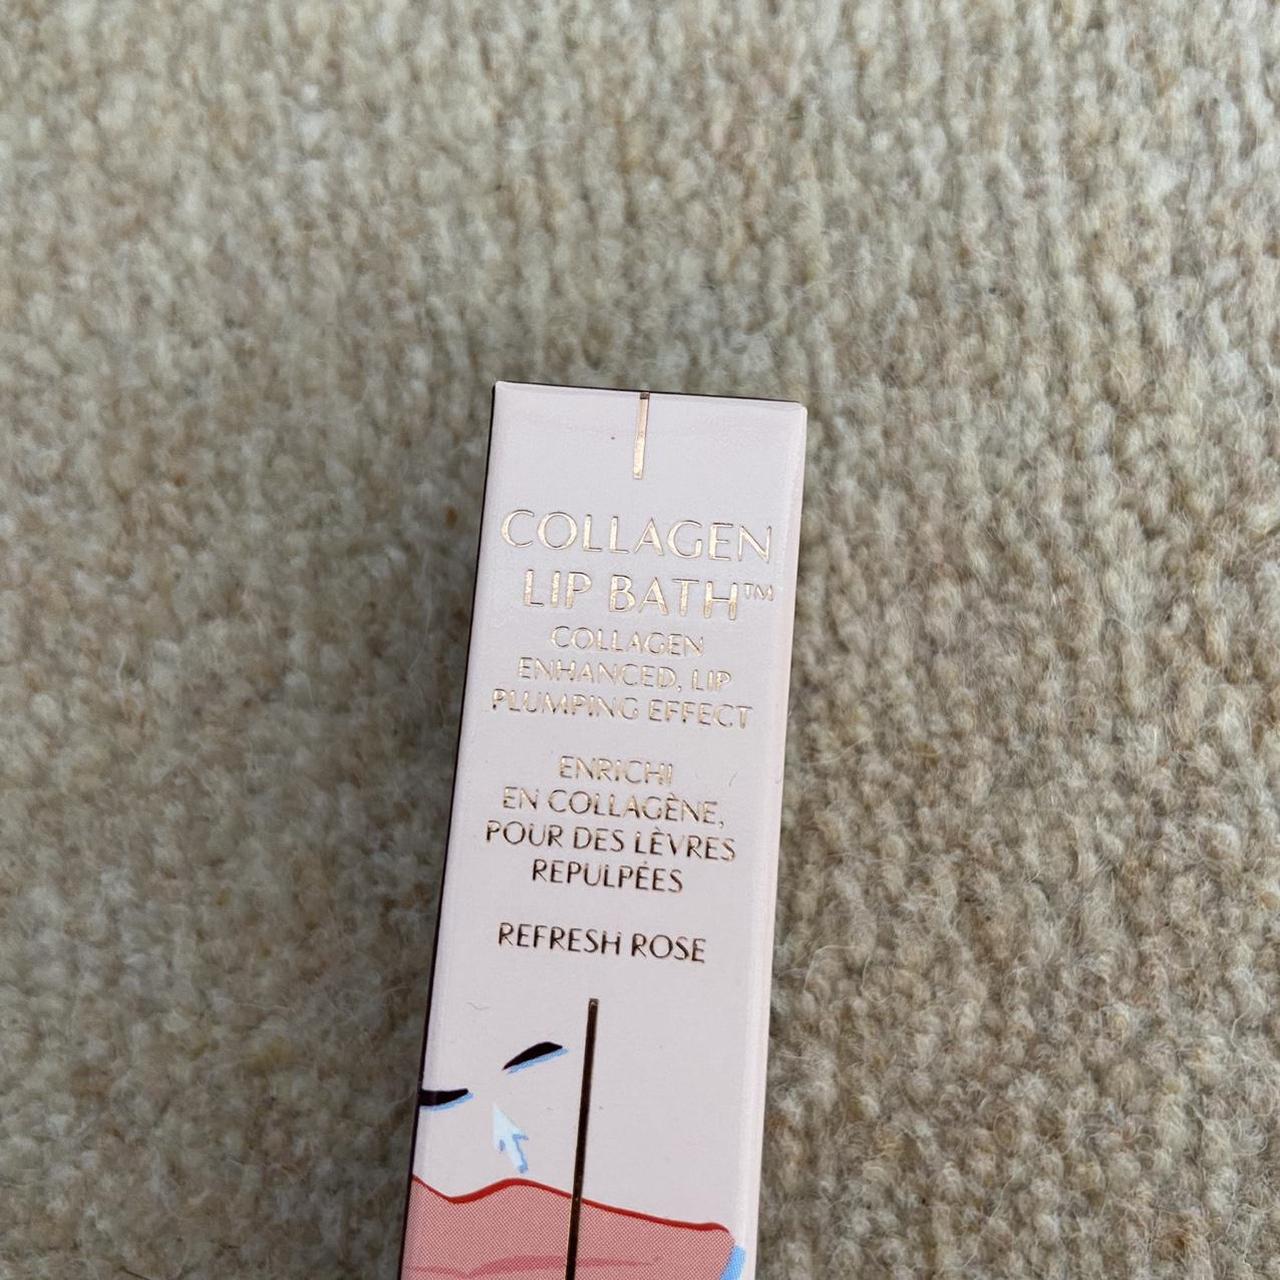 Product Image 2 - For @liliellaxo 🥰

Charlotte Tilbury Collagen